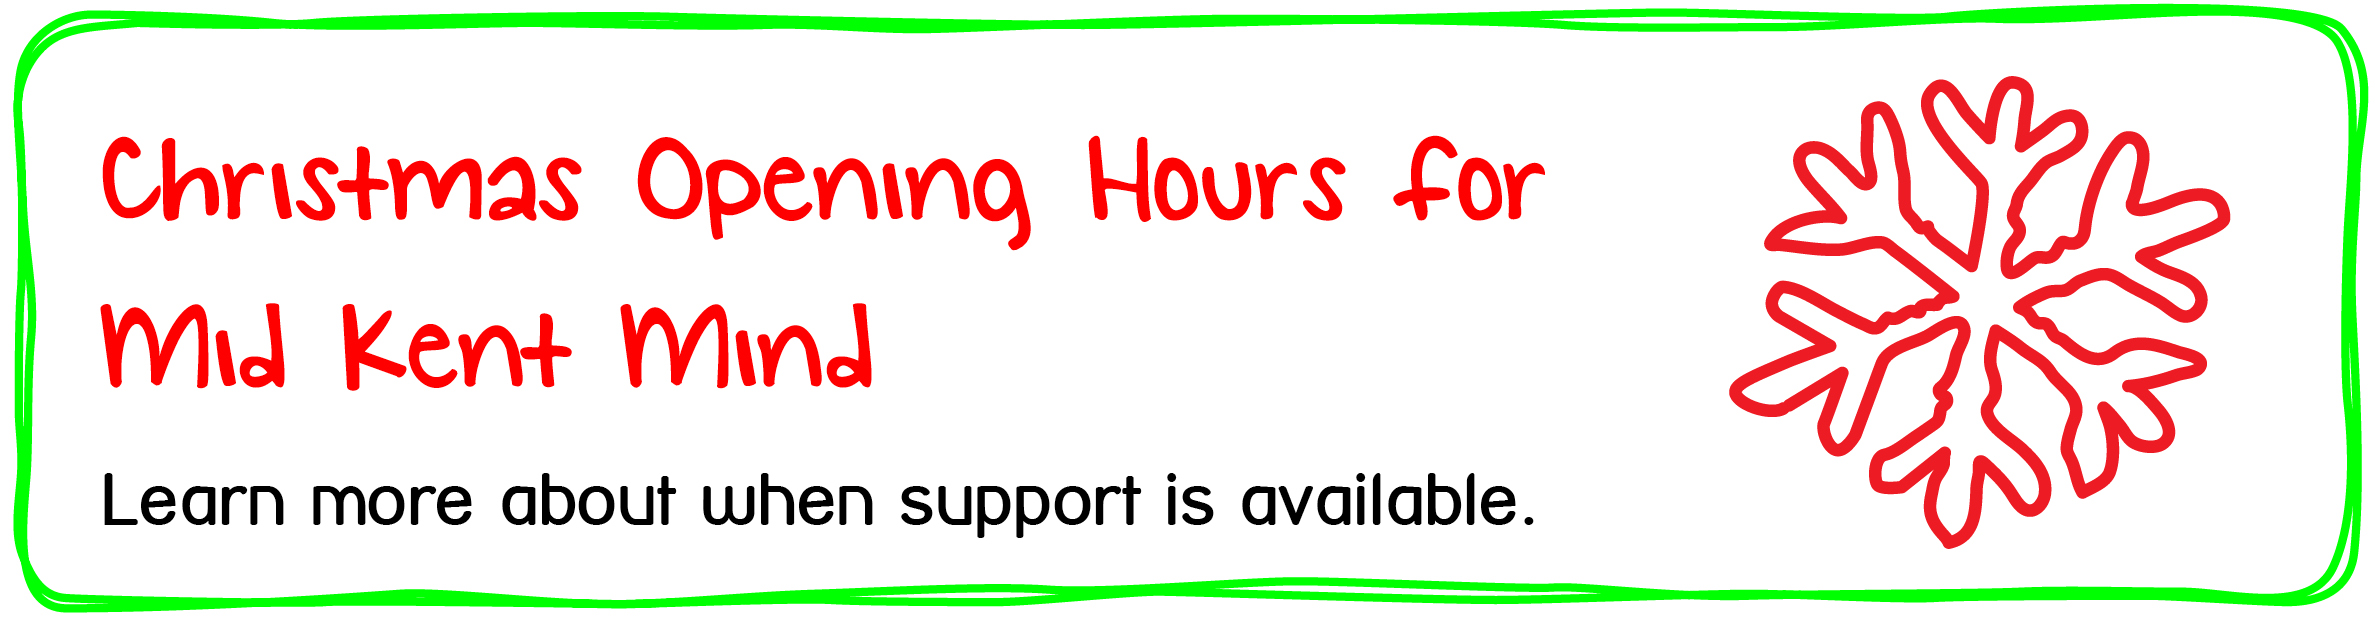 Christmas Opening Hours for Mid Kent Mind. Learn more about when support is available.